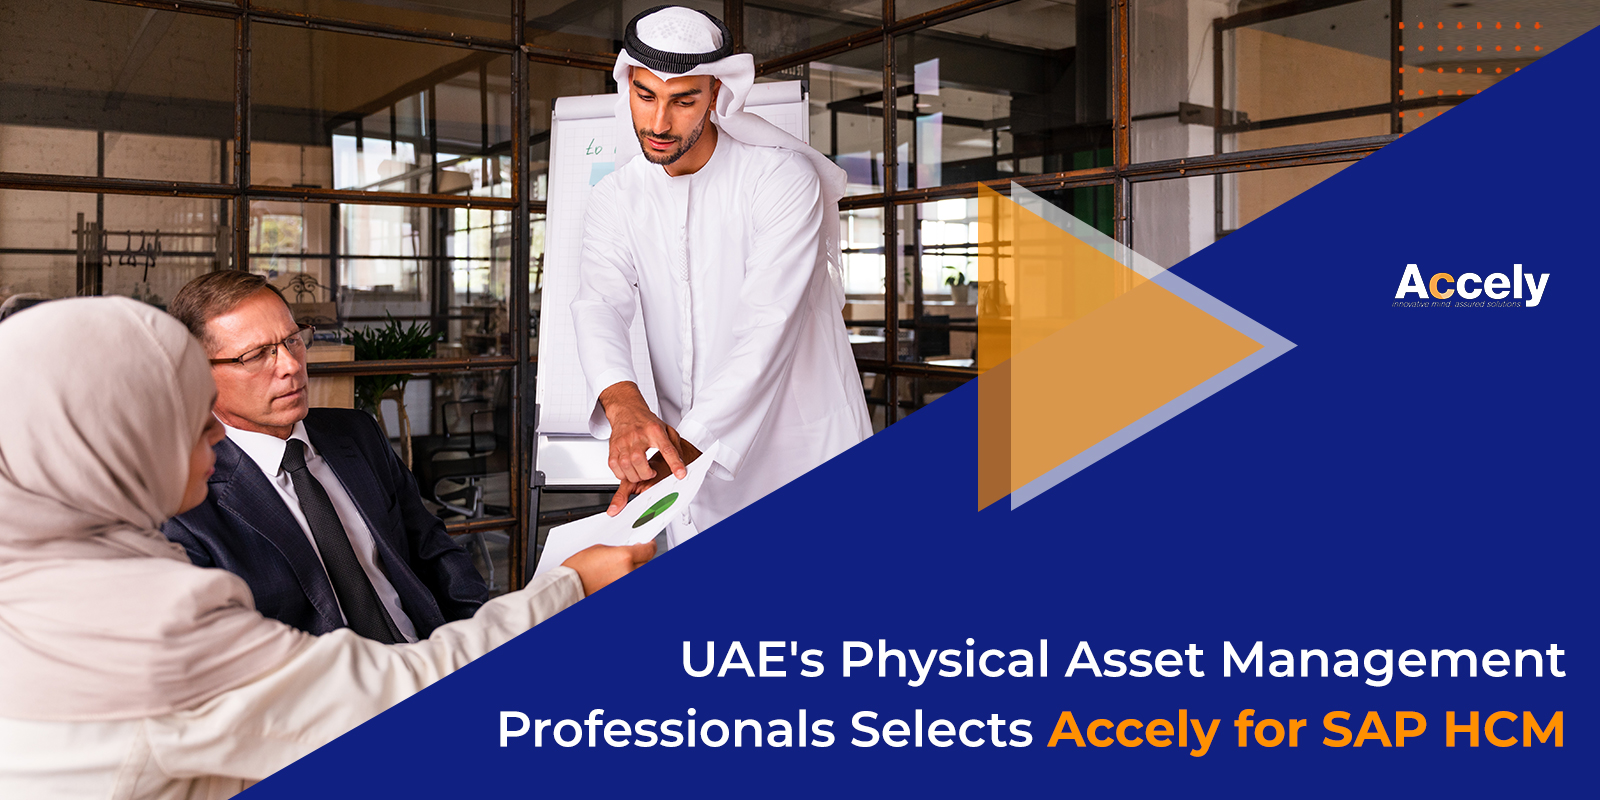 UAE's Physical Asset Management Professionals Selects Accely for SAP HCM